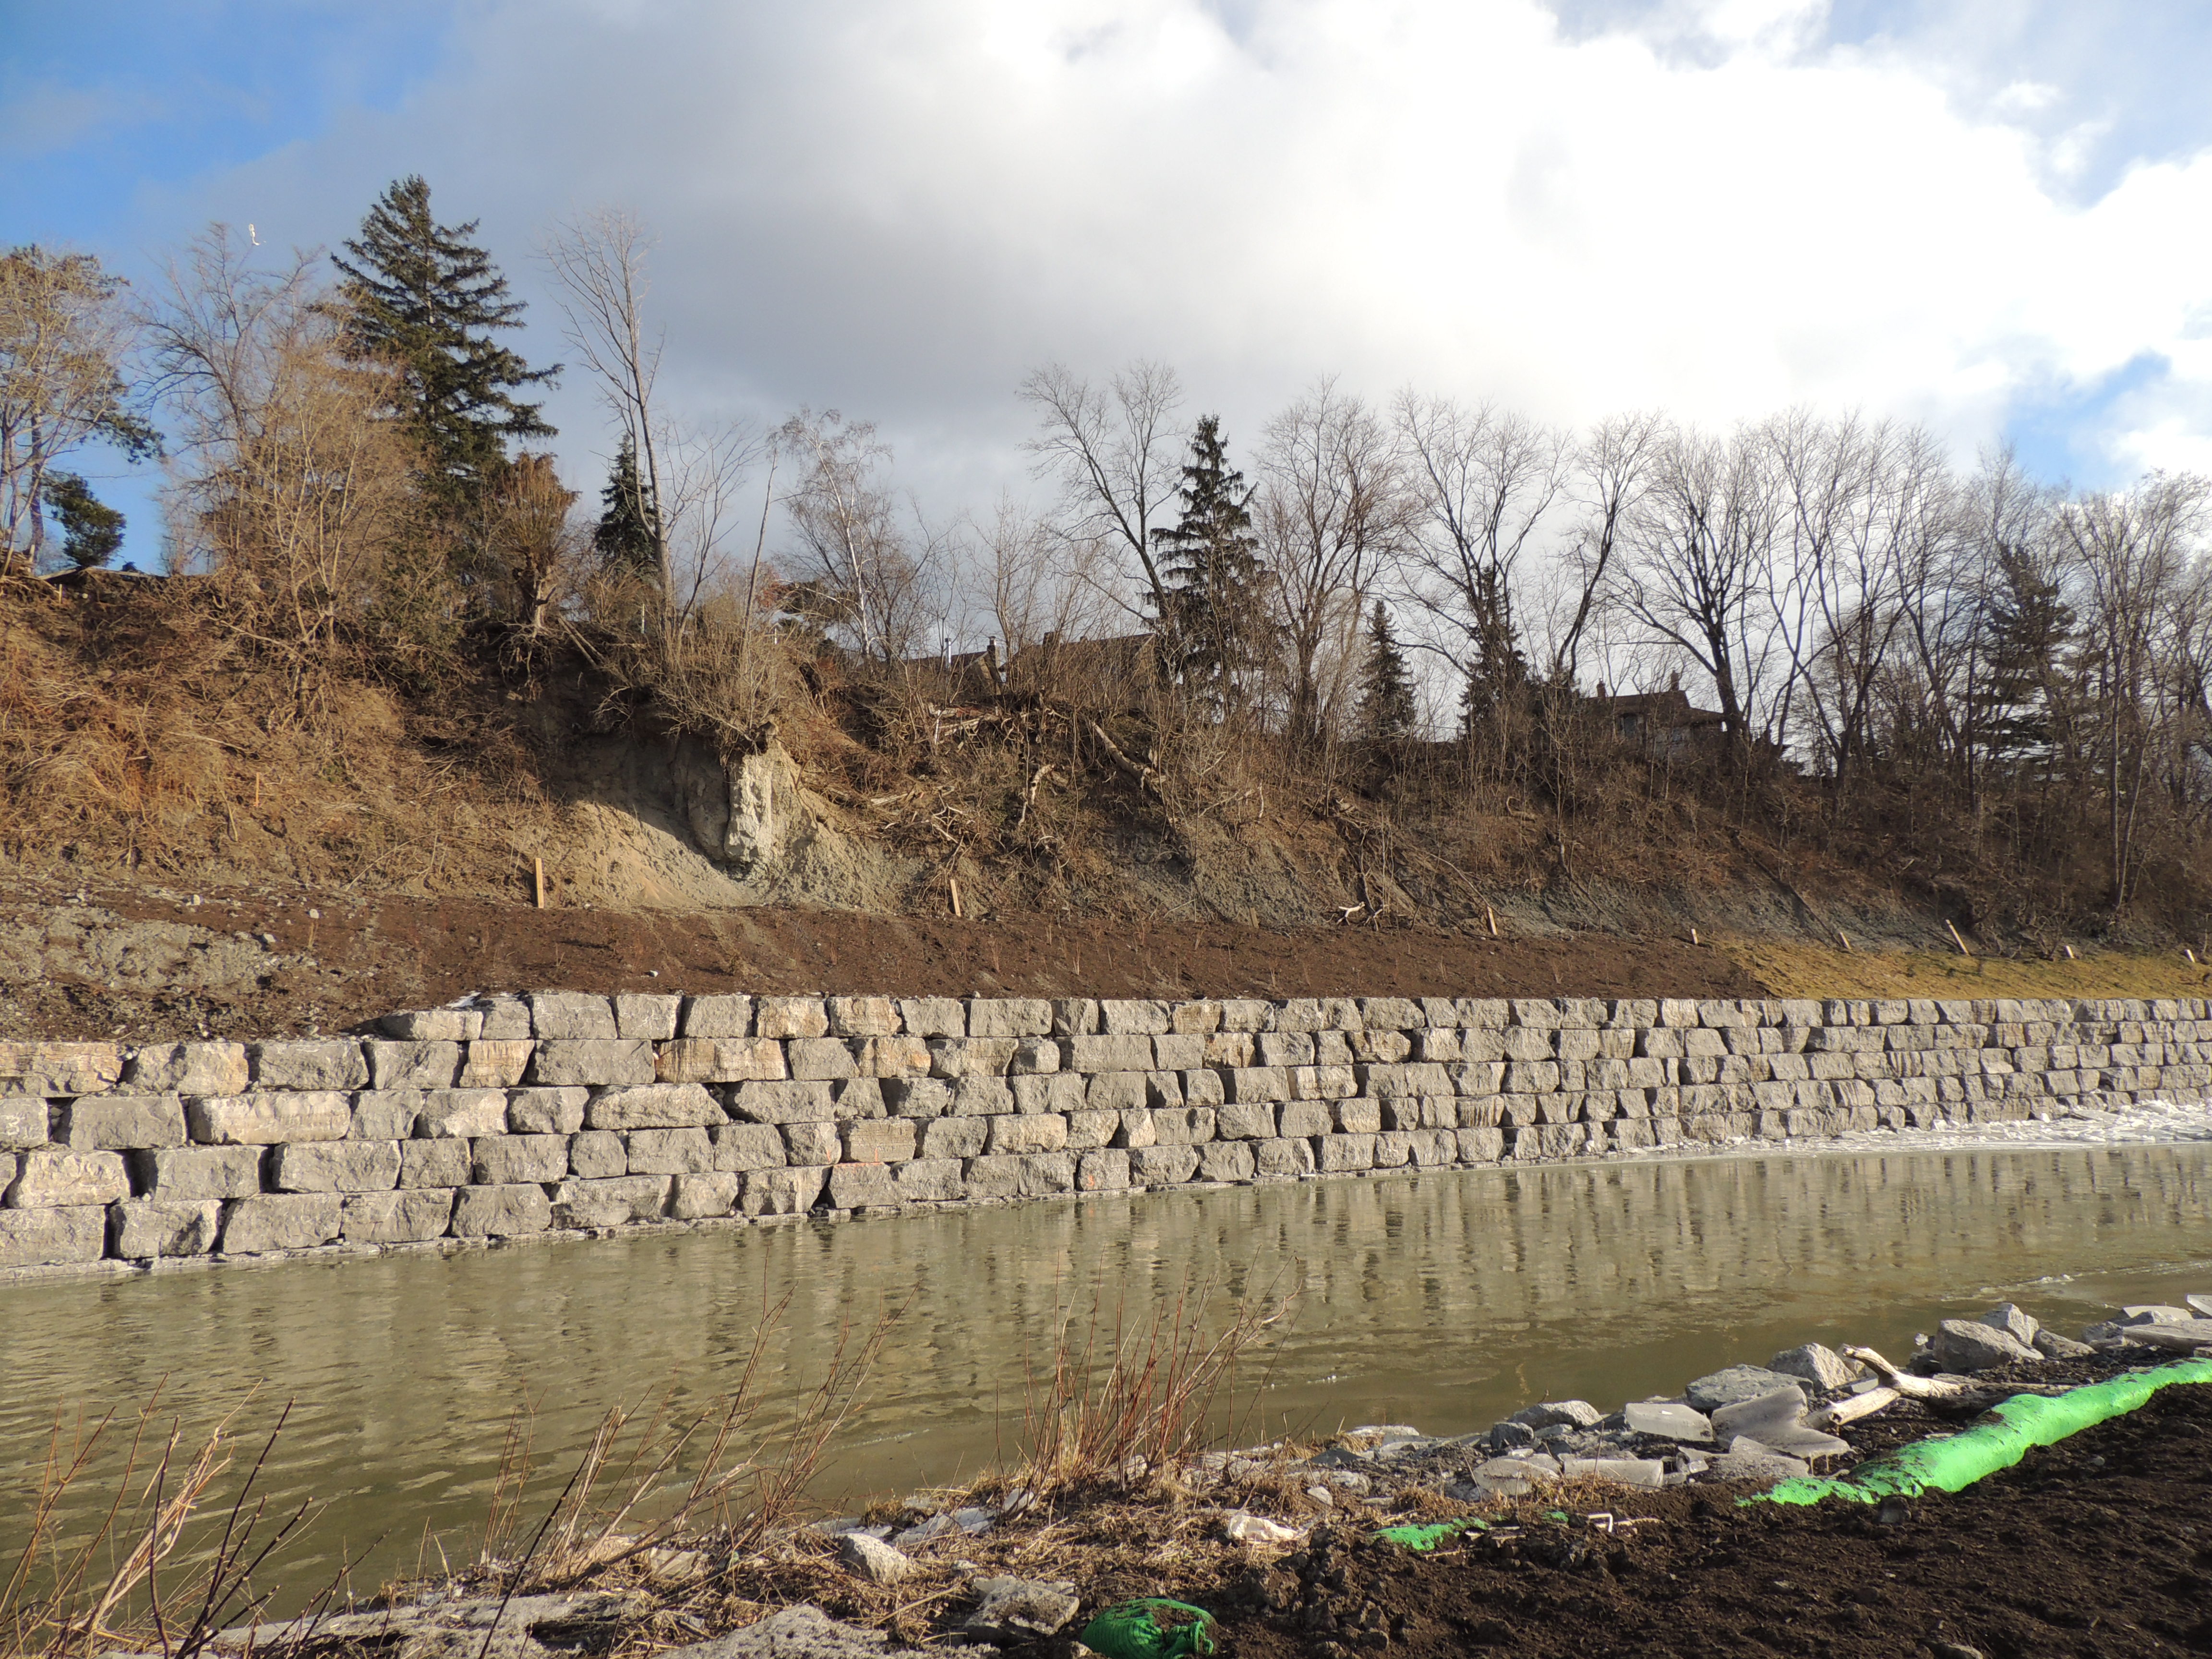 An armourstone wall and soil stabilization measures at the toe of a steep slope overlooking the Humber River